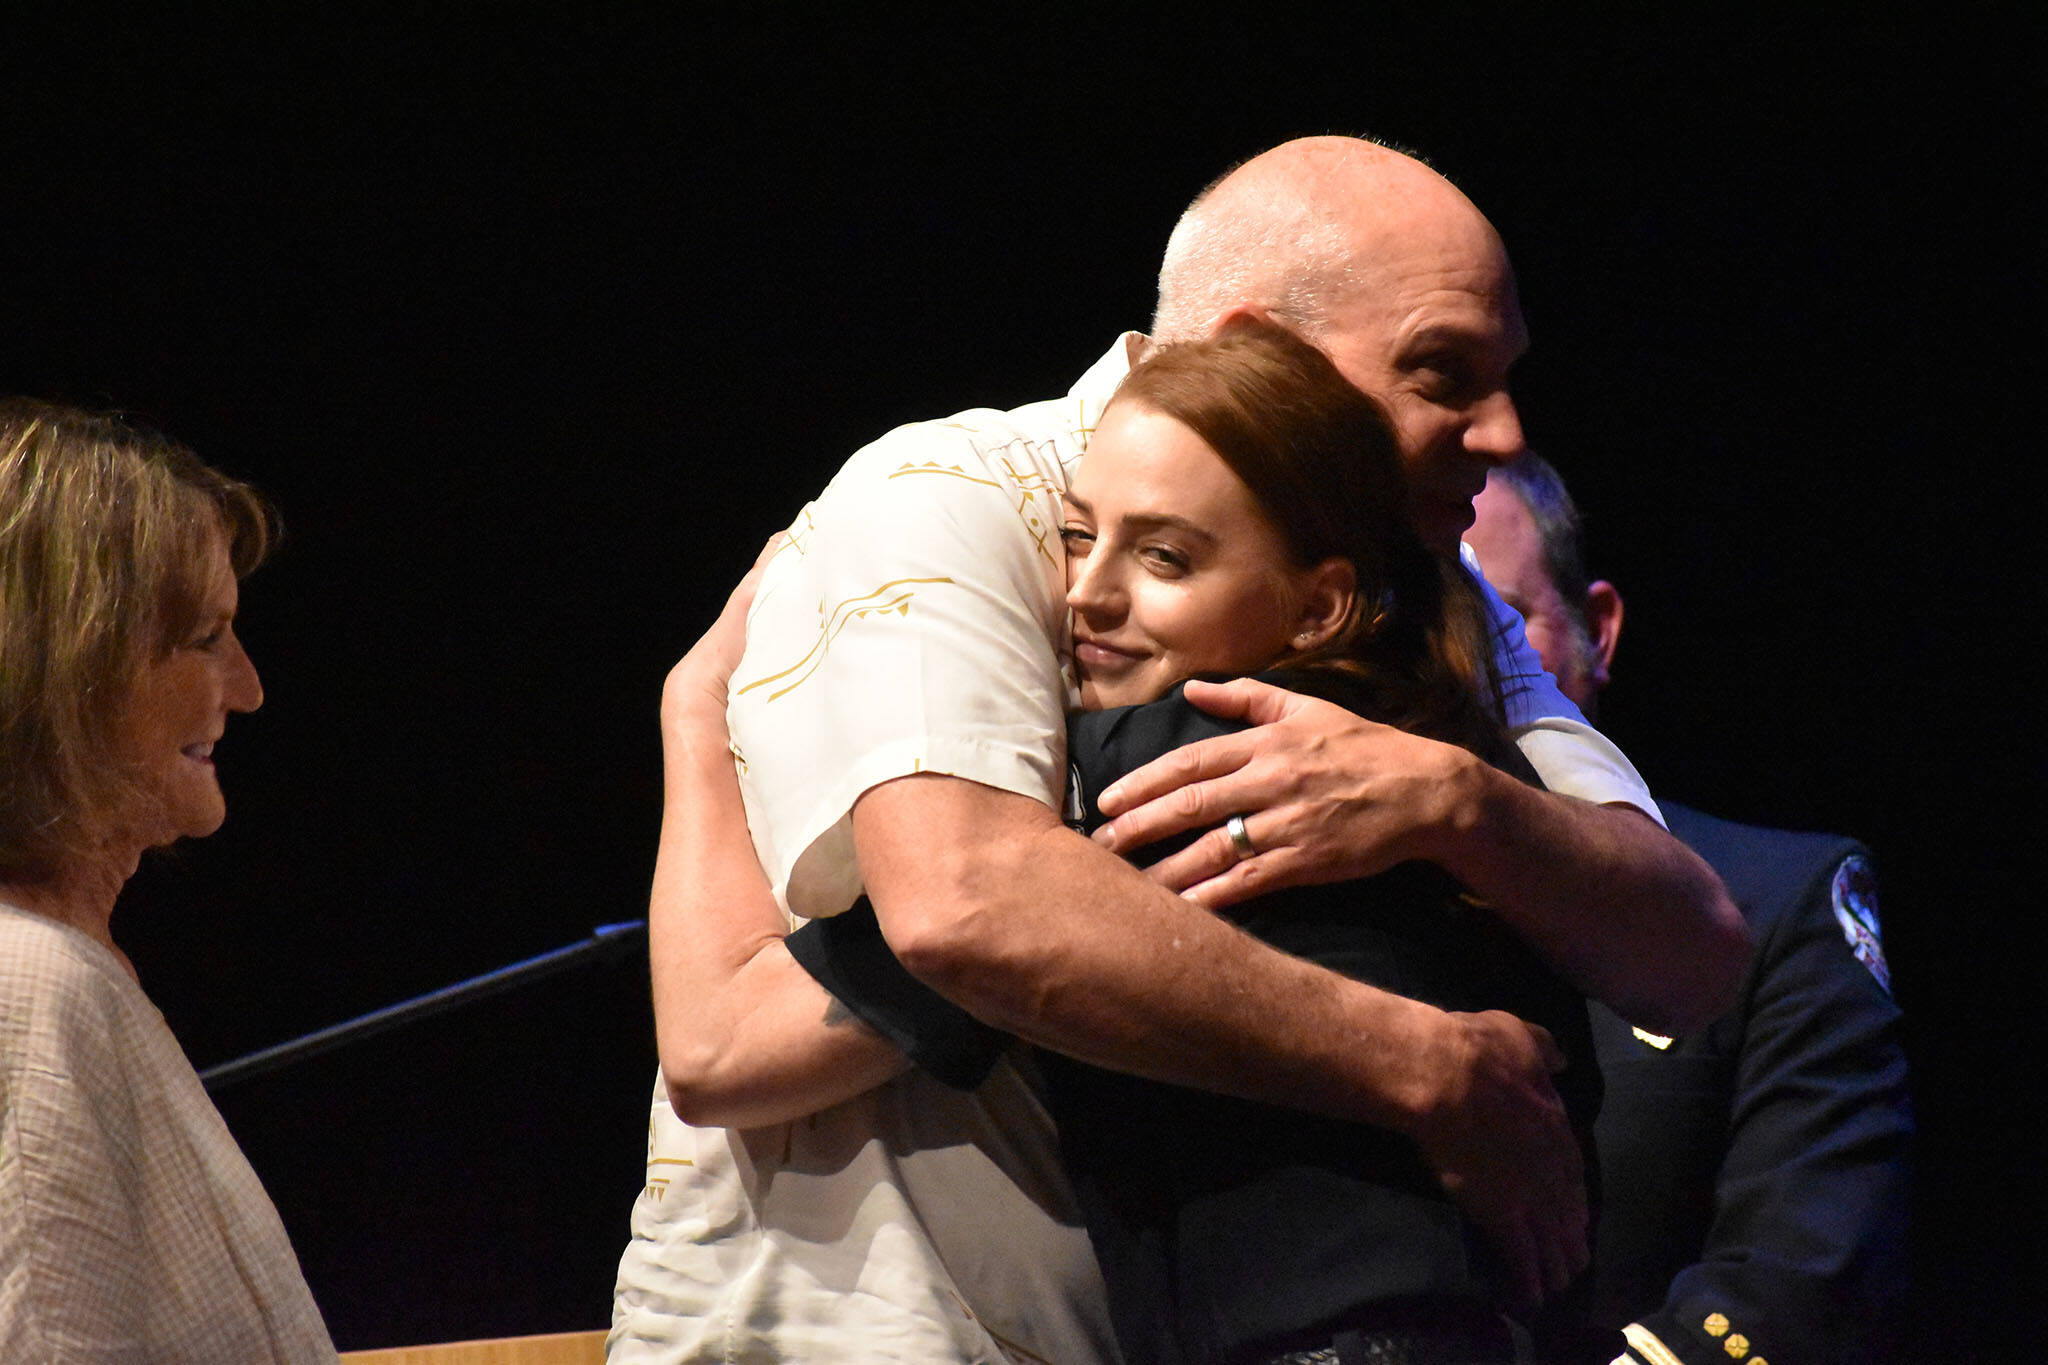 Graduating recruit Hannah Dahlquist shares a hug with her father during the badge pinning ceremony.